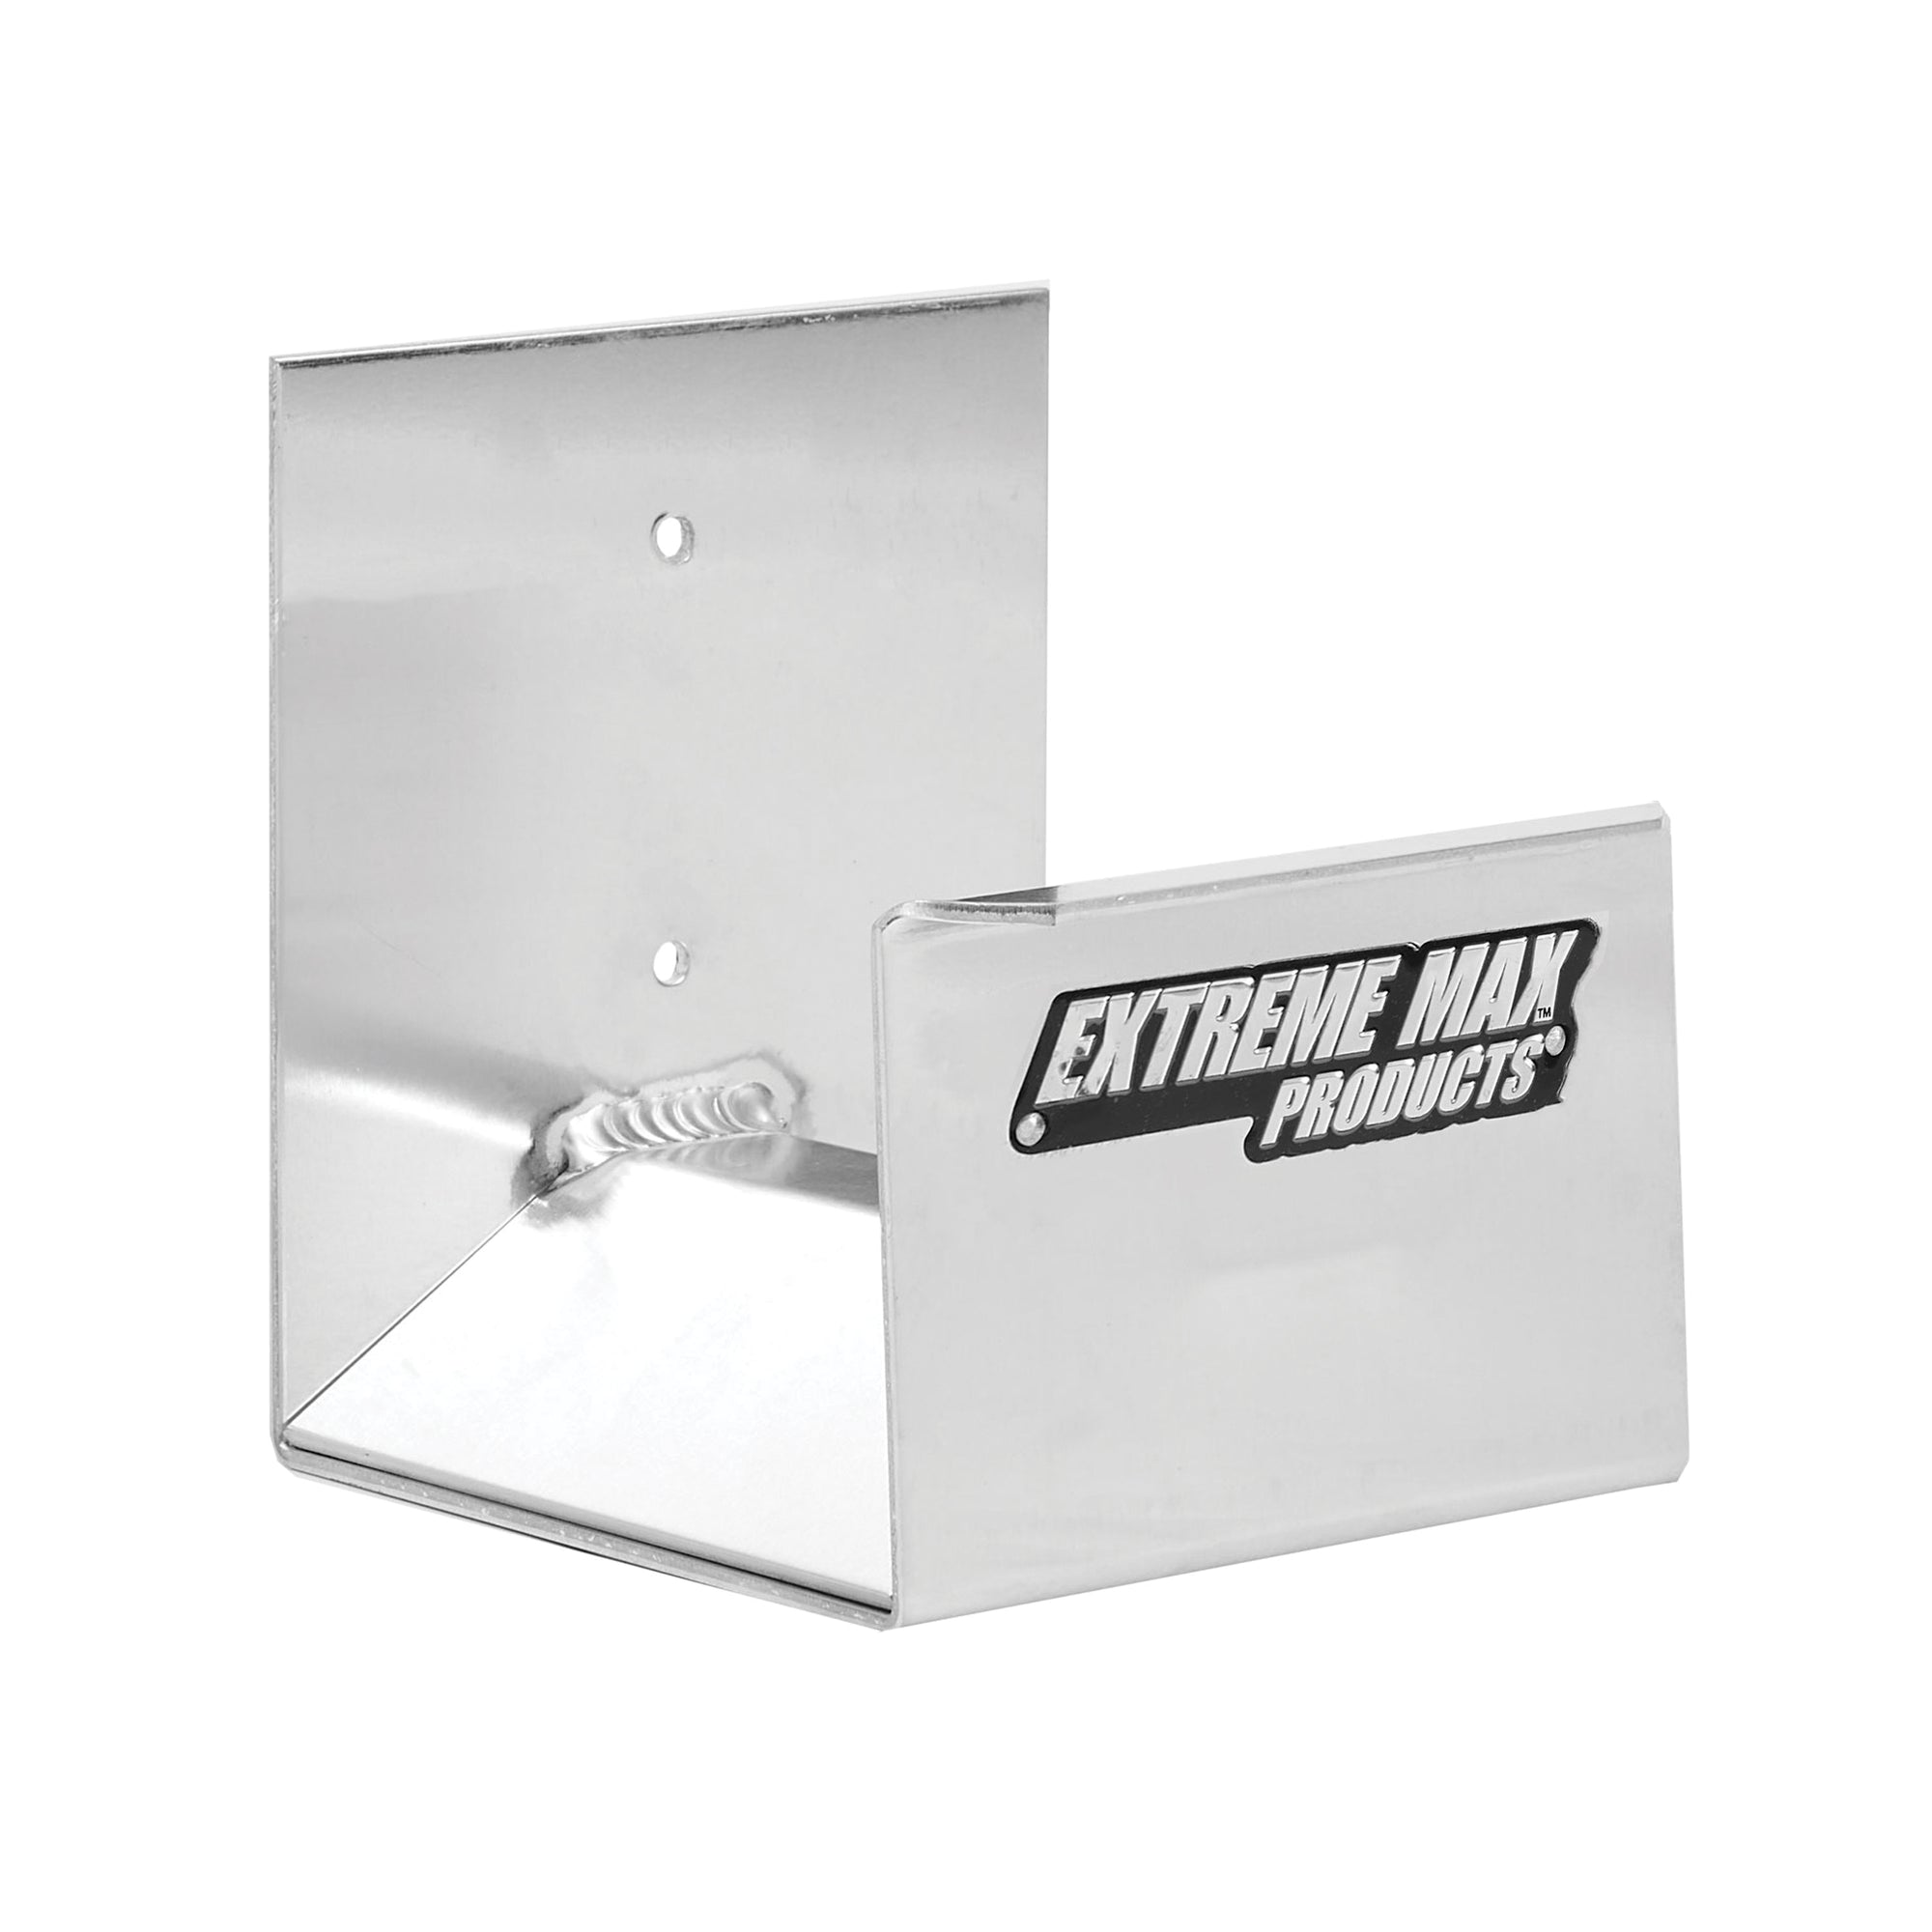 Extreme Max 5001.6197 Wall-Mount Aluminum Cord and Hose Hanger for Race Trailer, Garage, Shop, Enclosed Trailer, Toy Hauler